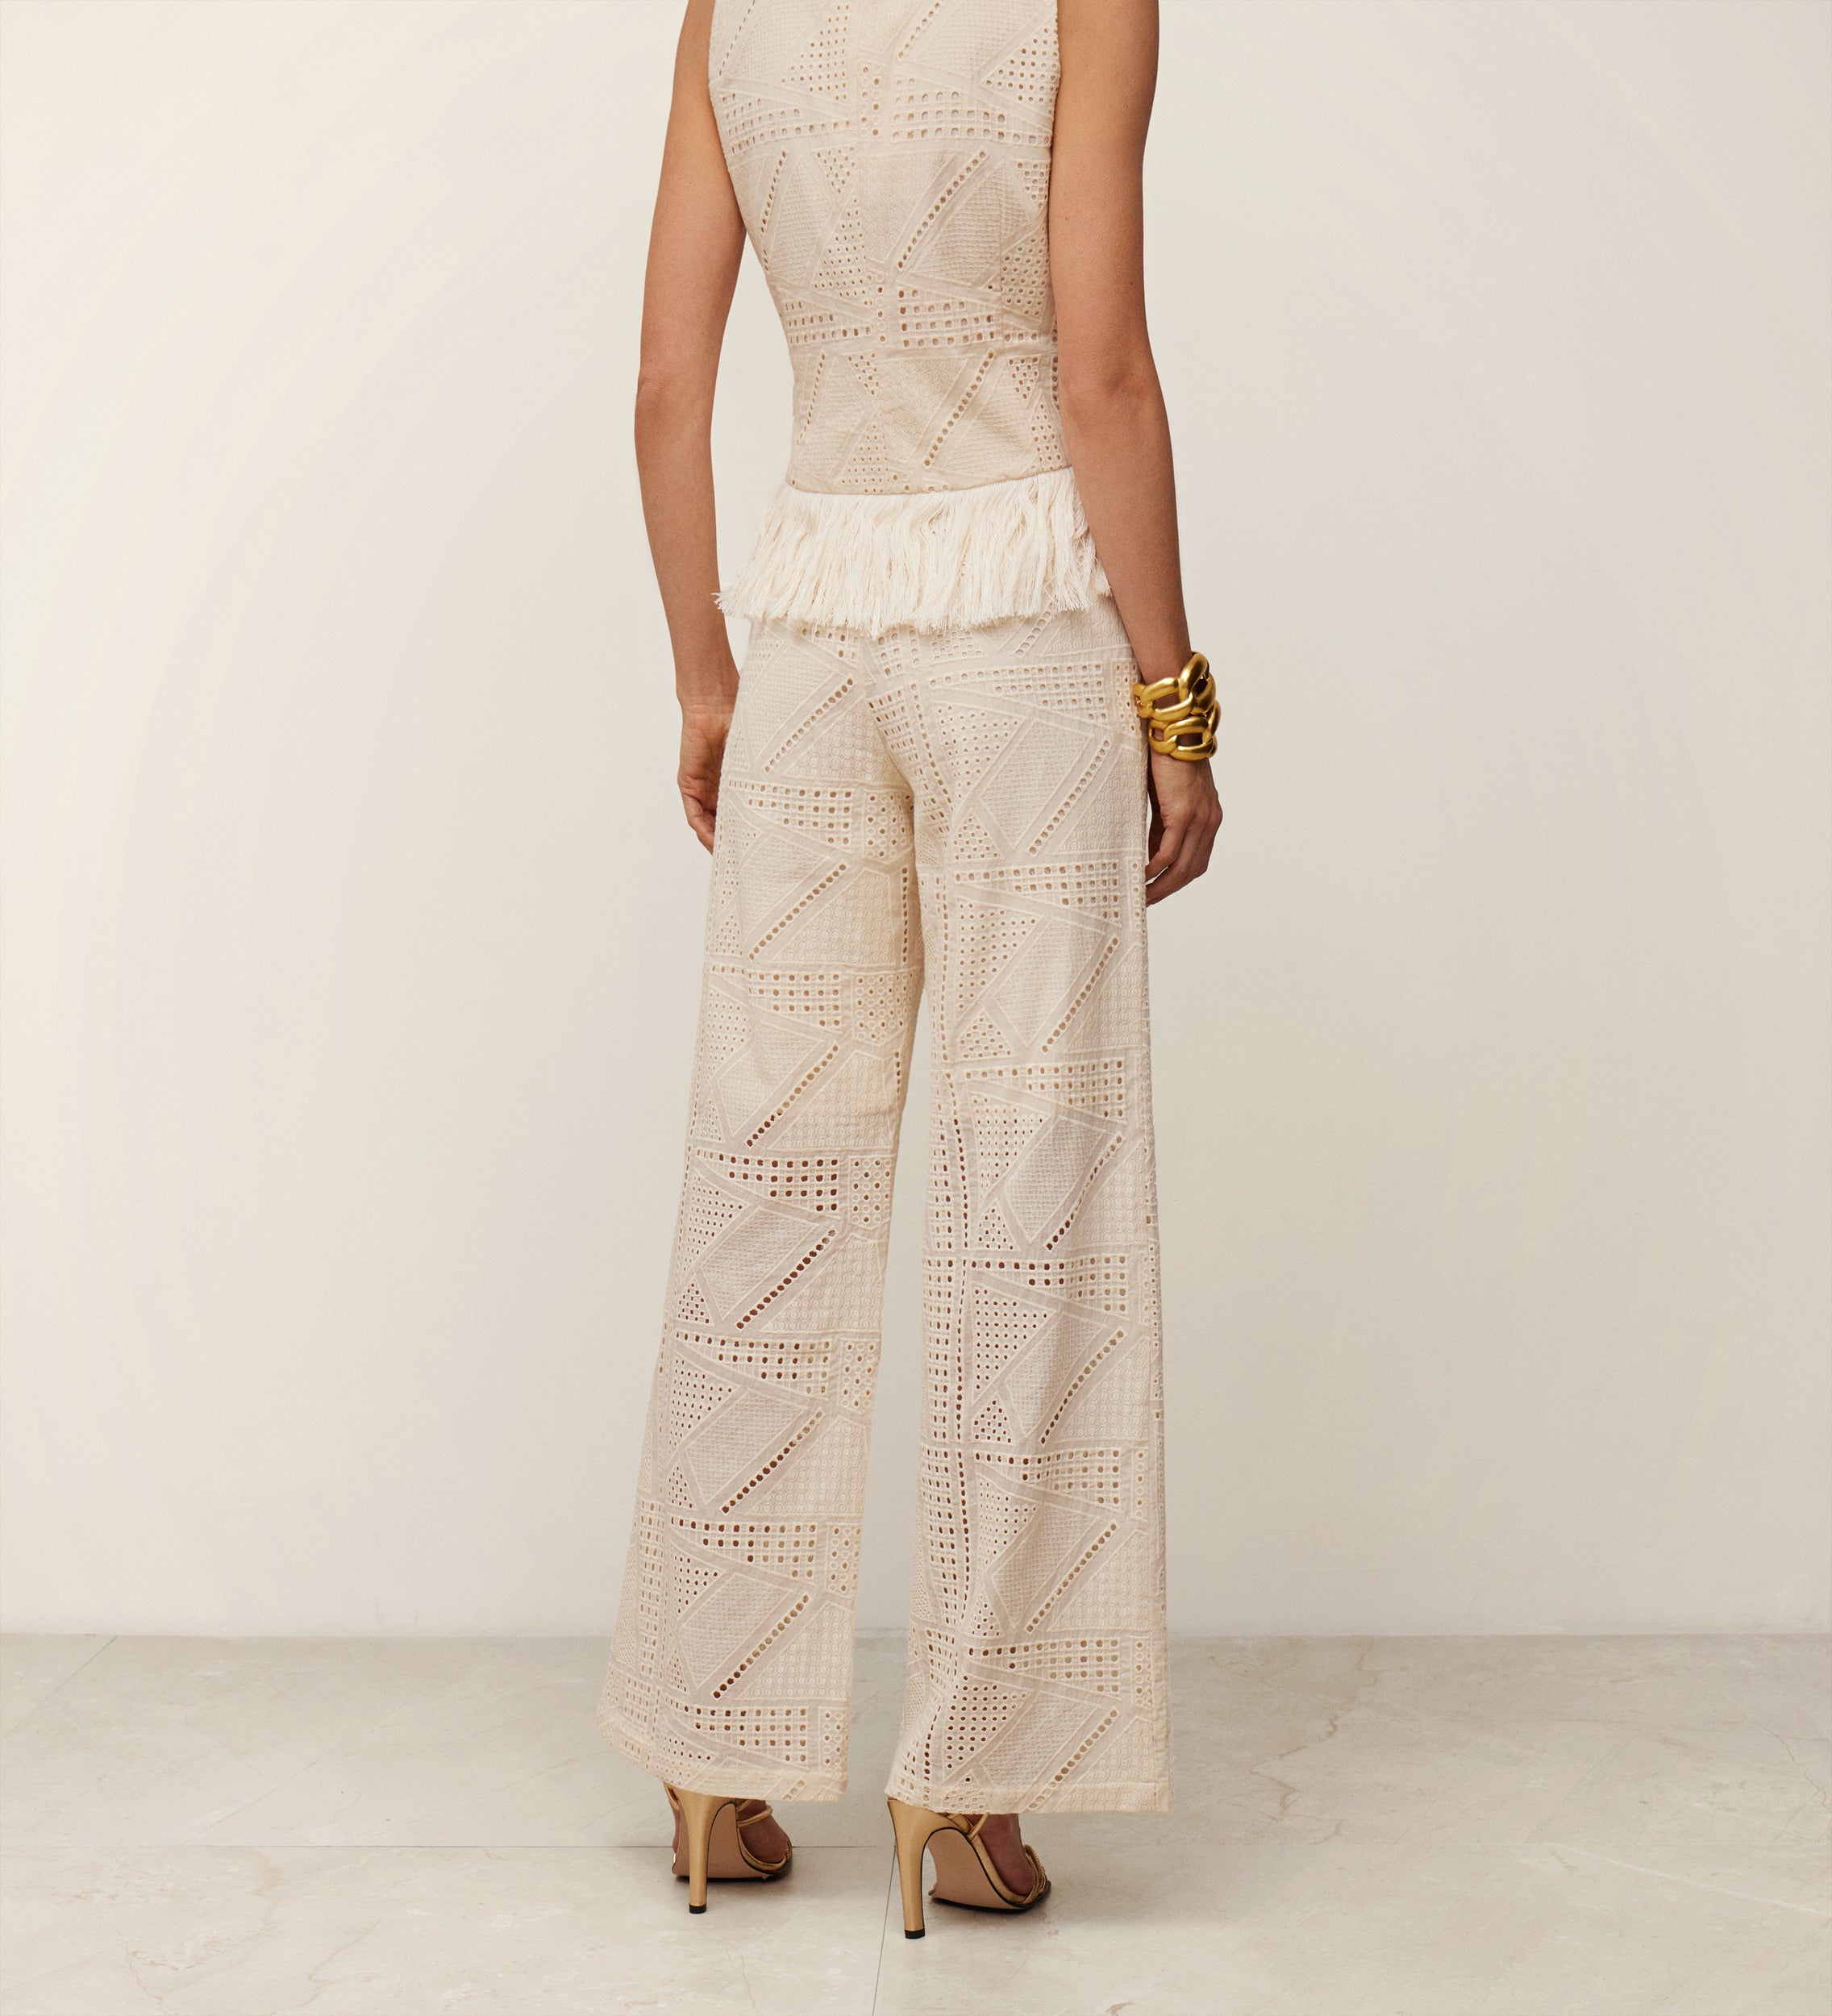 Embroidered cotton pants